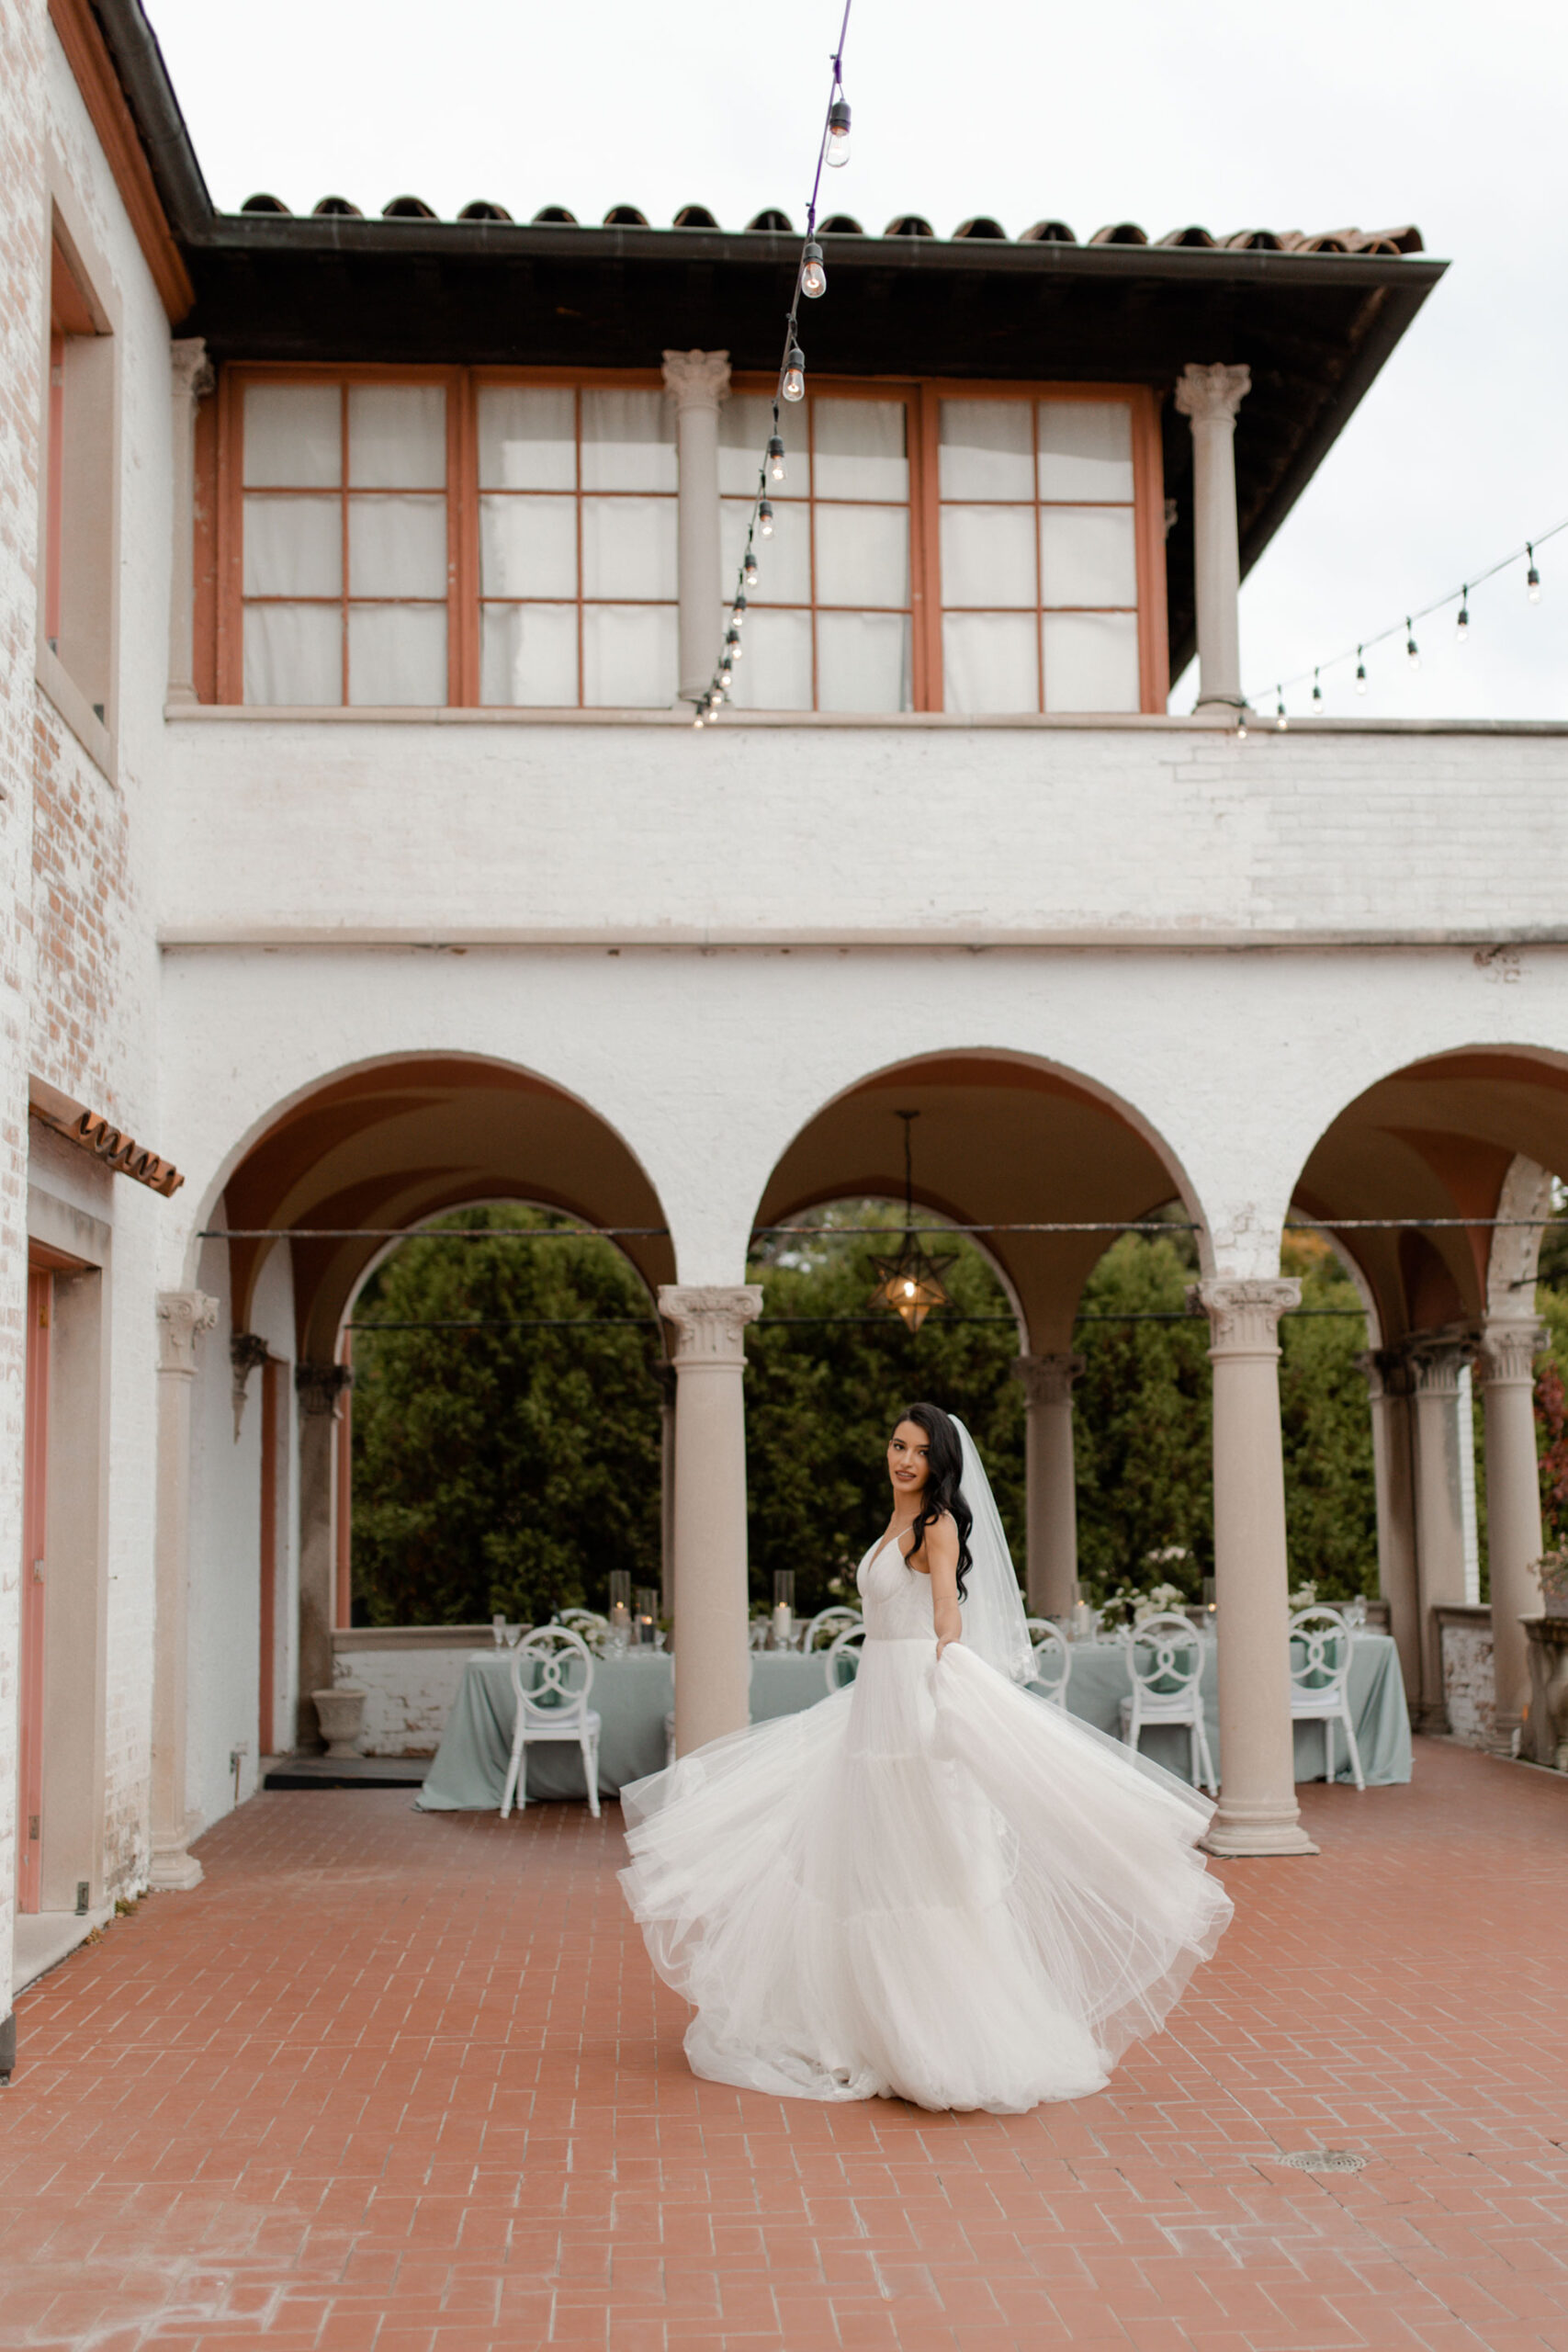 An italian inspired wedding at the Villa Terrace Museum in Milwaukee, WI photographed by Claire Neville Photography.